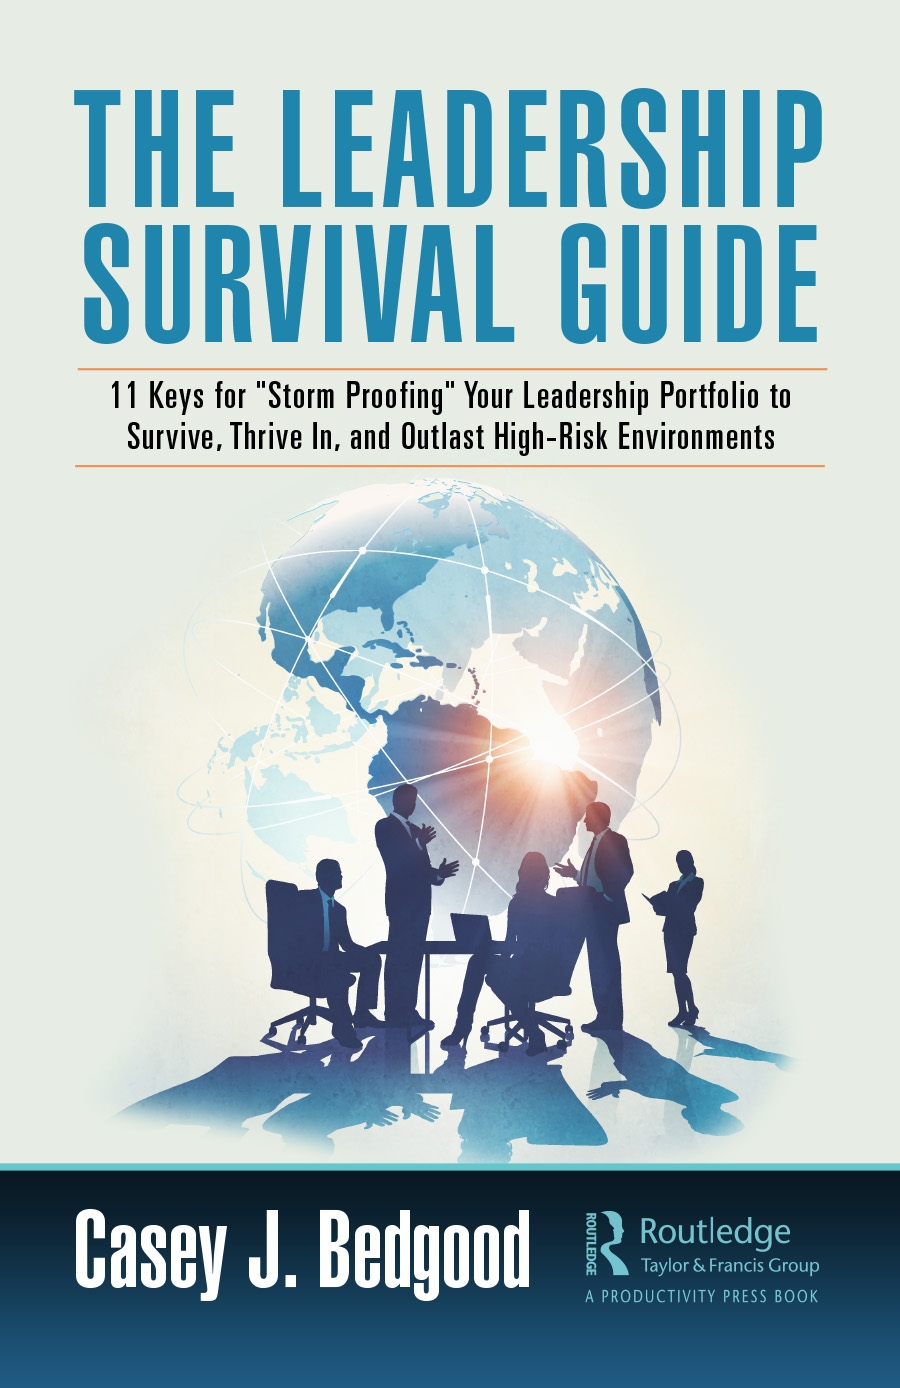 The Leadership Survival Guide: 11 Keys for Storm Proofing Your Leadership Portfolio to Survive, Thrive In, and Outlast High-Risk Environments